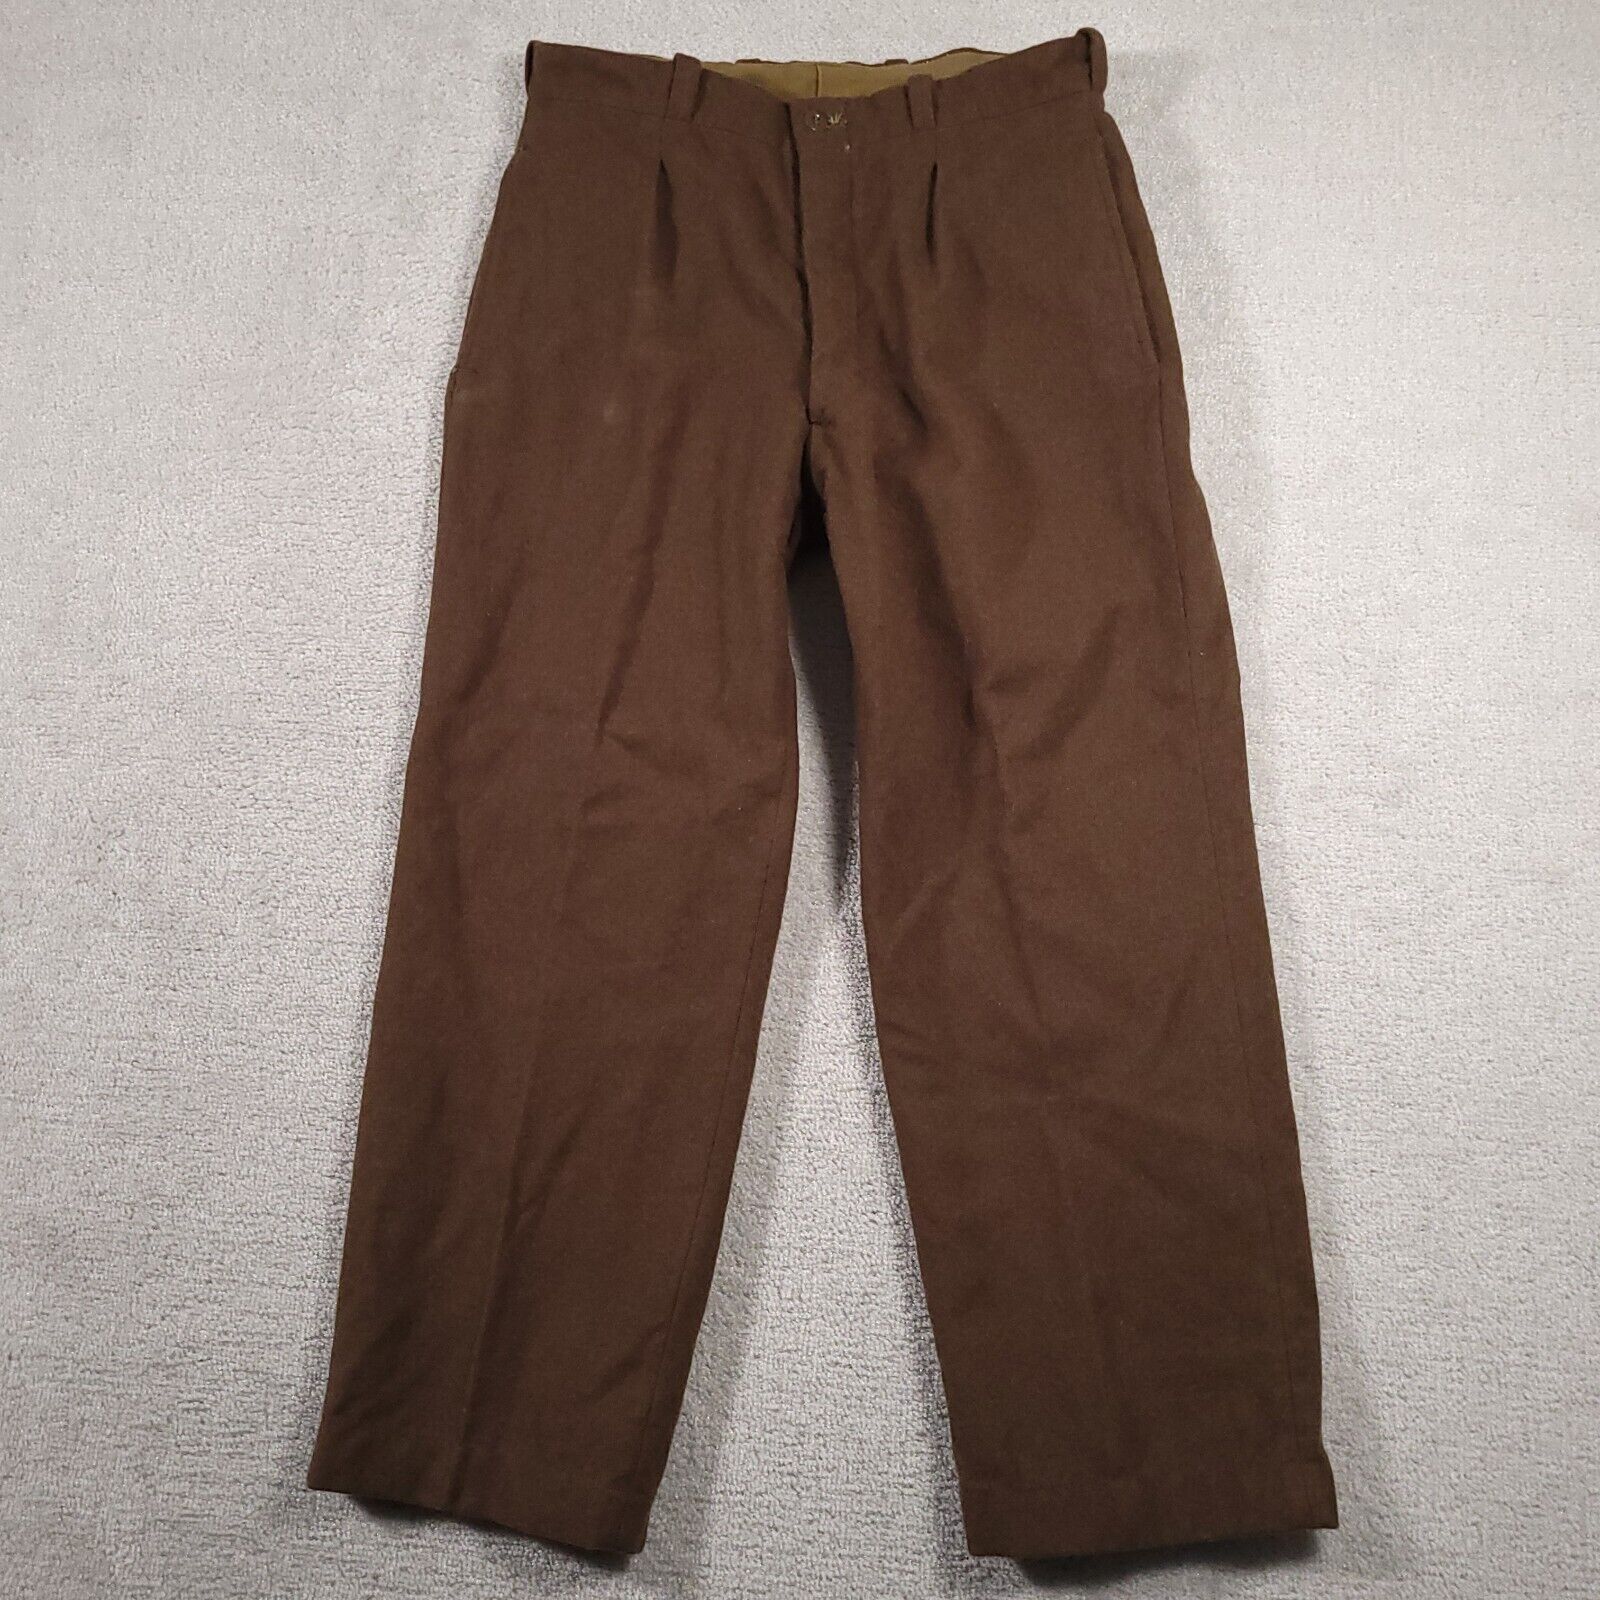 Paulhan & Fils Montpellier Vtg 50s Wool French Military Pants 33x28